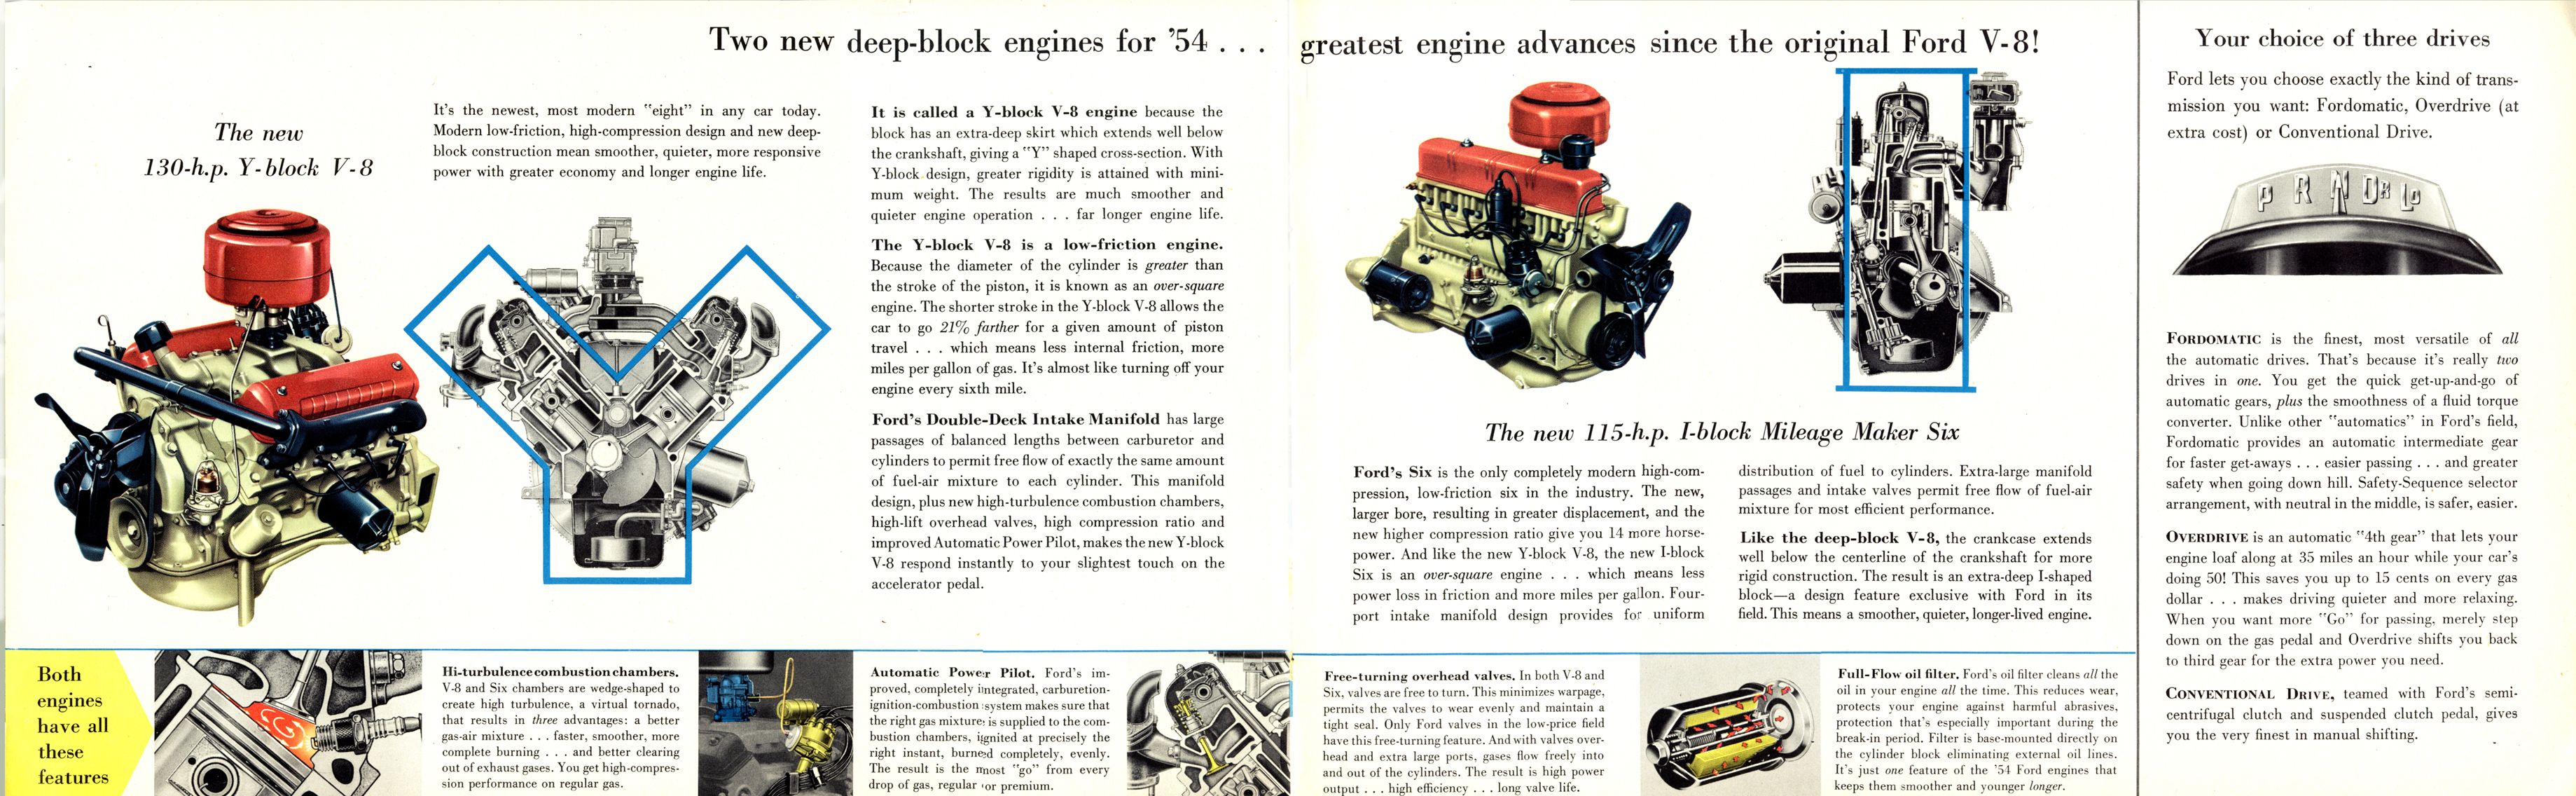 1954 Ford Brochure Page 11